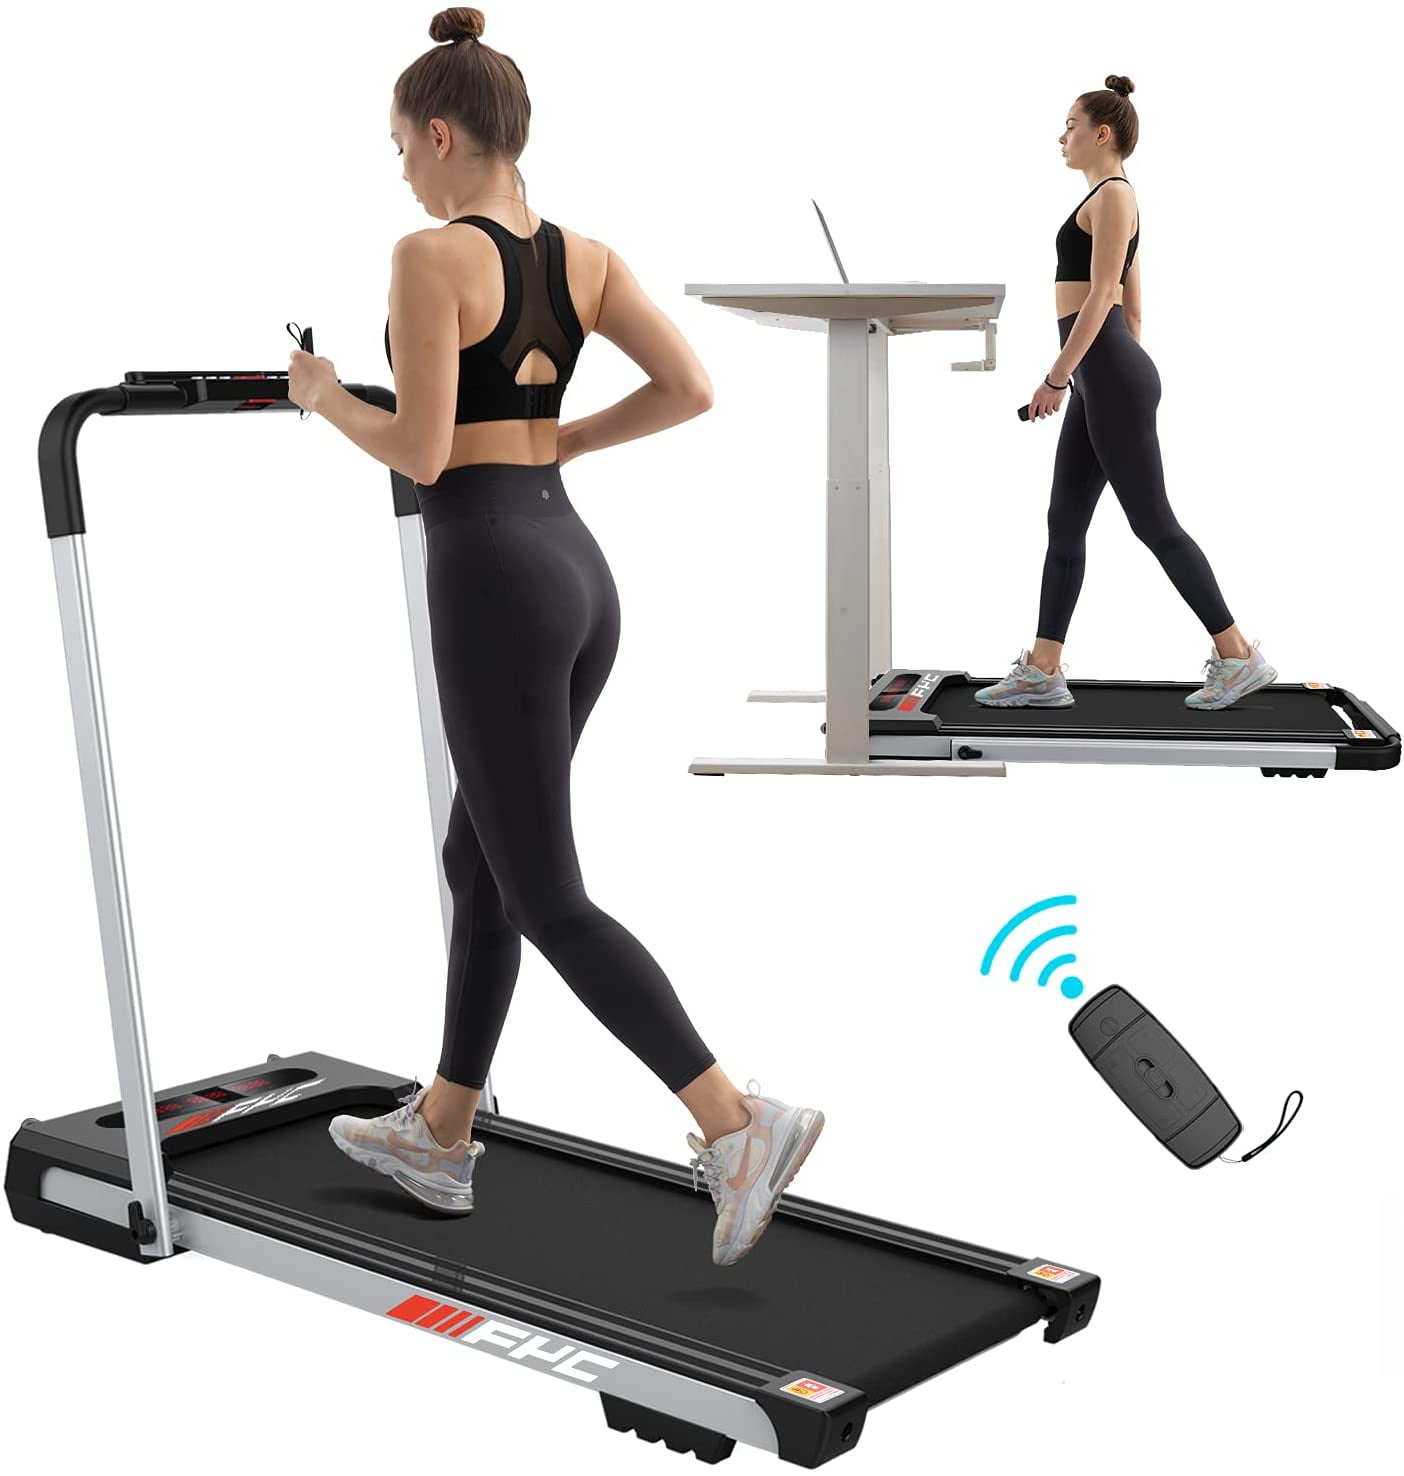 Under Desk Electric Treadmill Installation-Free,Walking Jogging Machine for Home/Office Use Motorized Running Machine with Bluetooth Folding Treadmill 